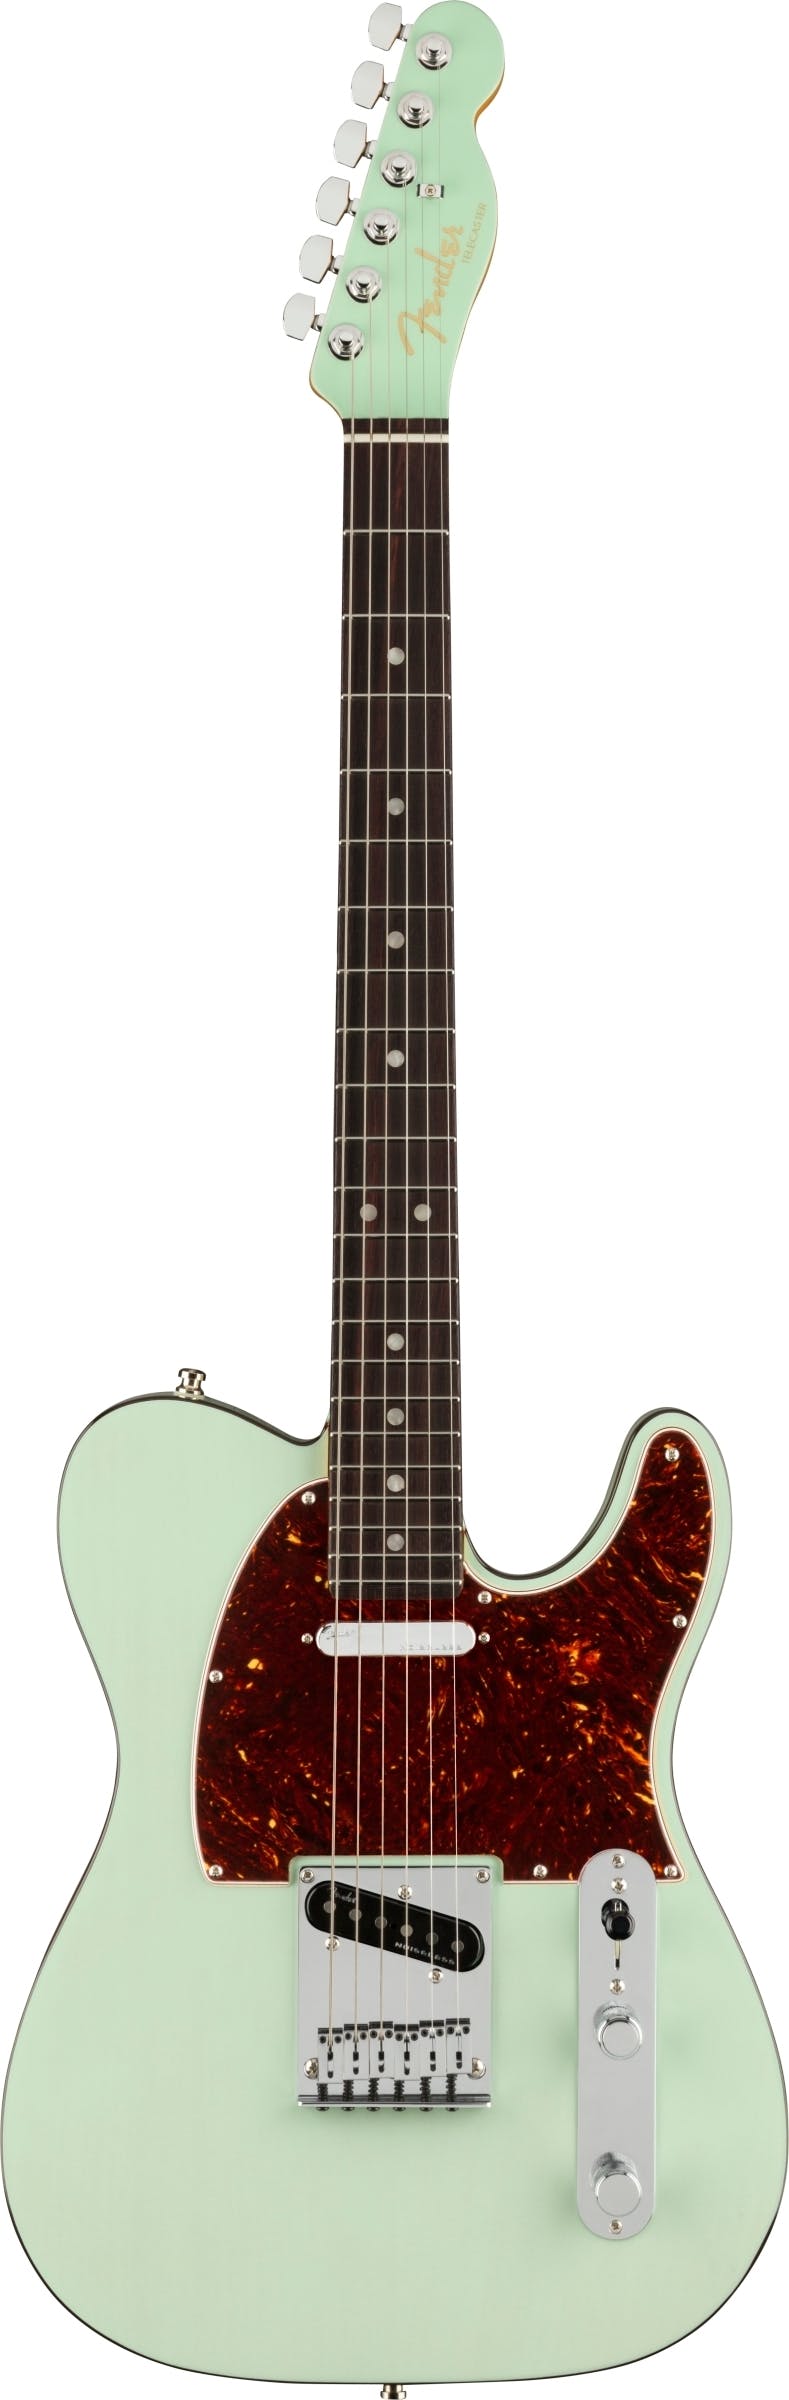 American Ultra Luxe Telecaster®